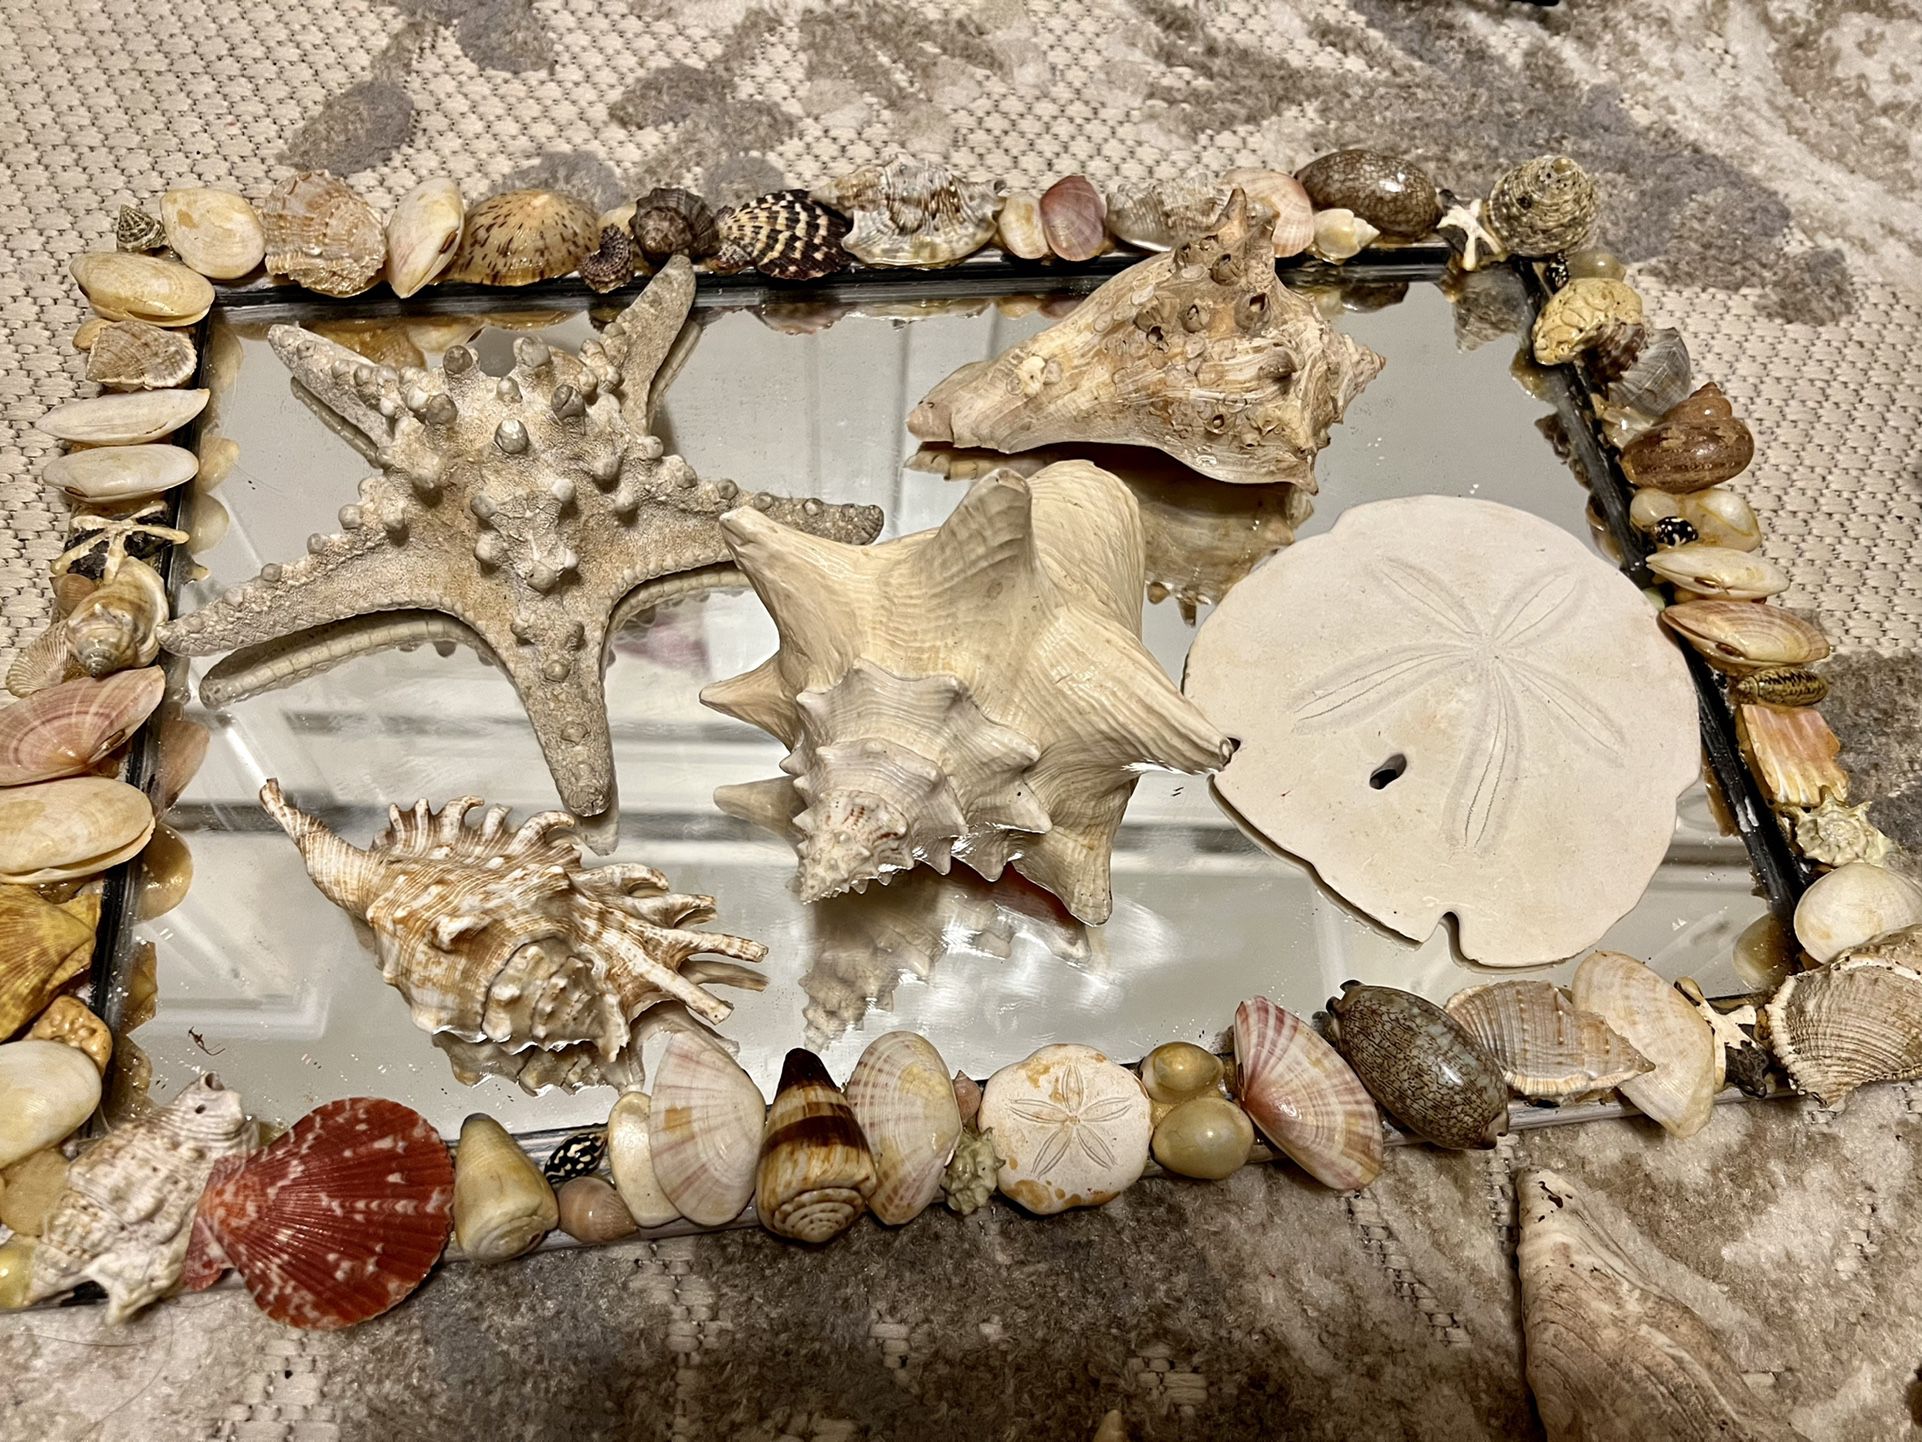 Antique Mirror 12”x18” with shell frame & HUGE collection of sea shells including 9 LARGE CONCHS & MORE ! Coastal Decor